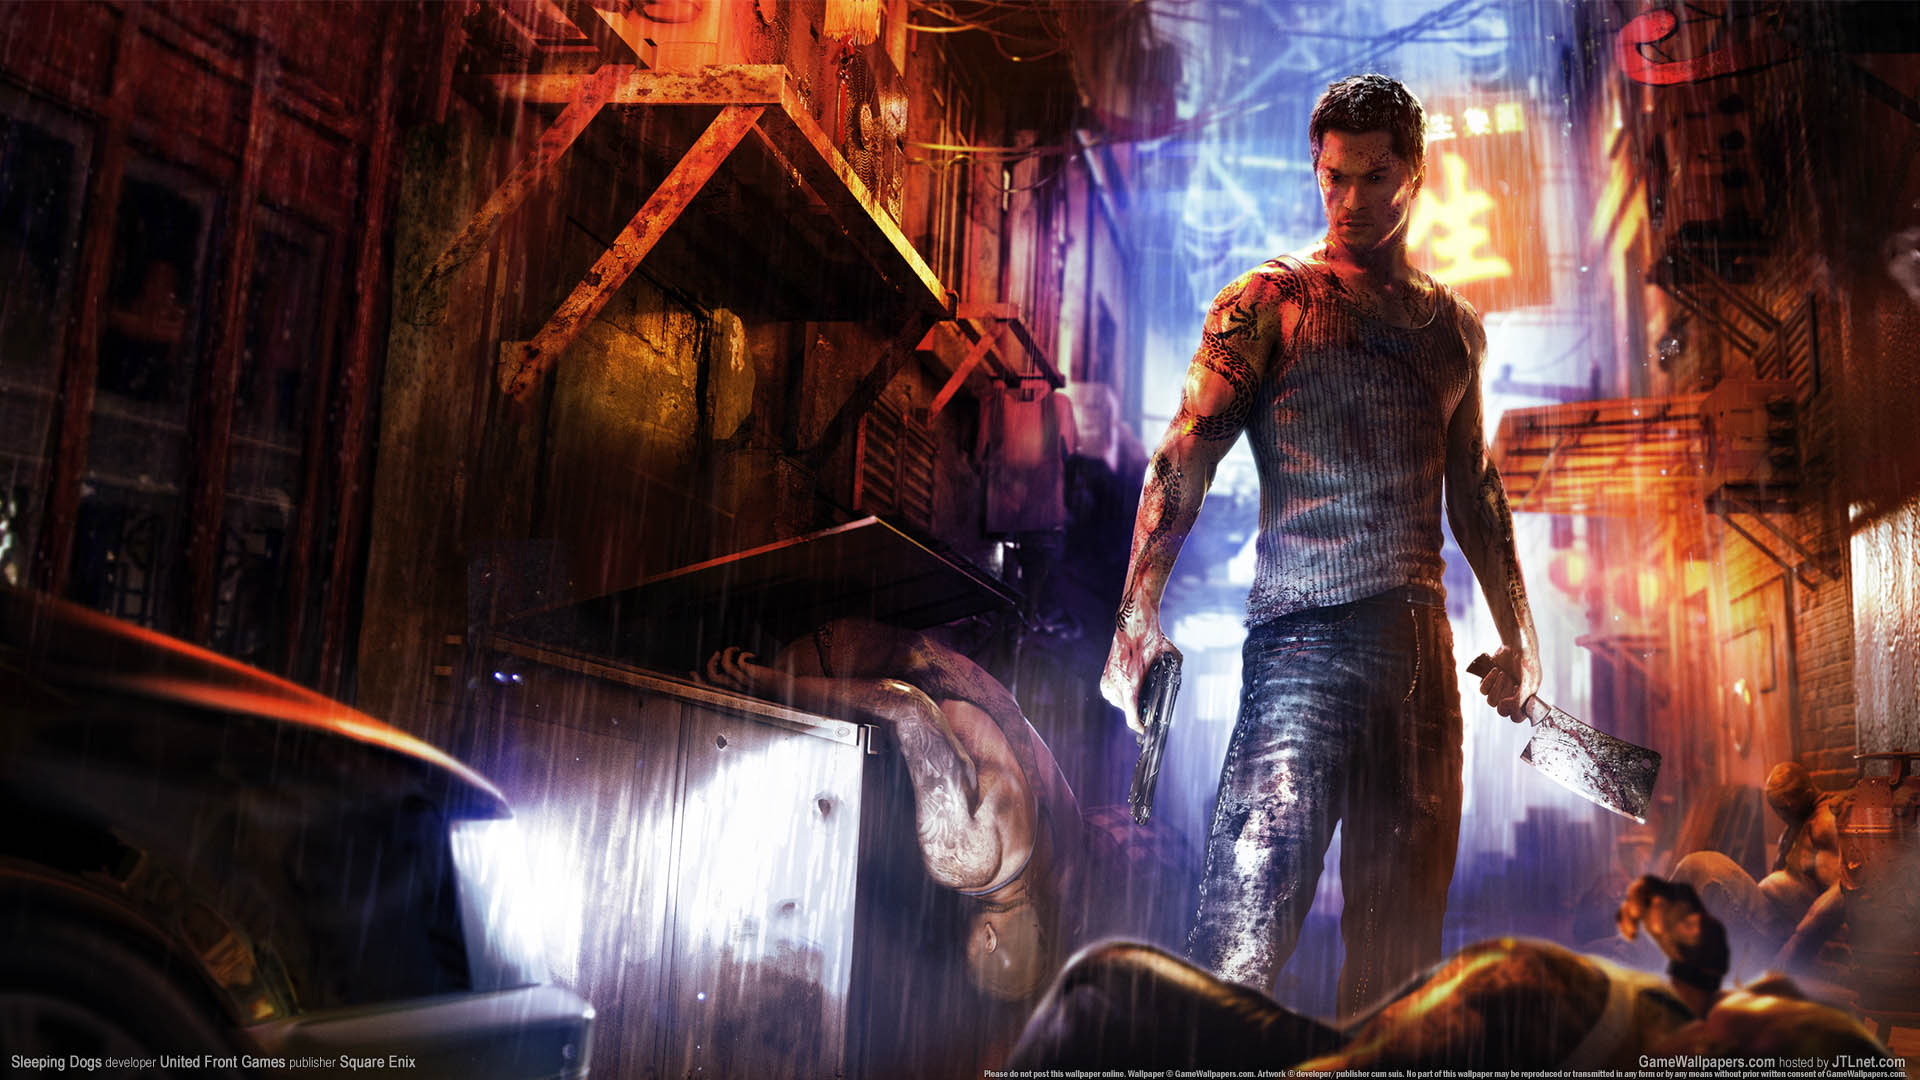 hd sleeping dogs images